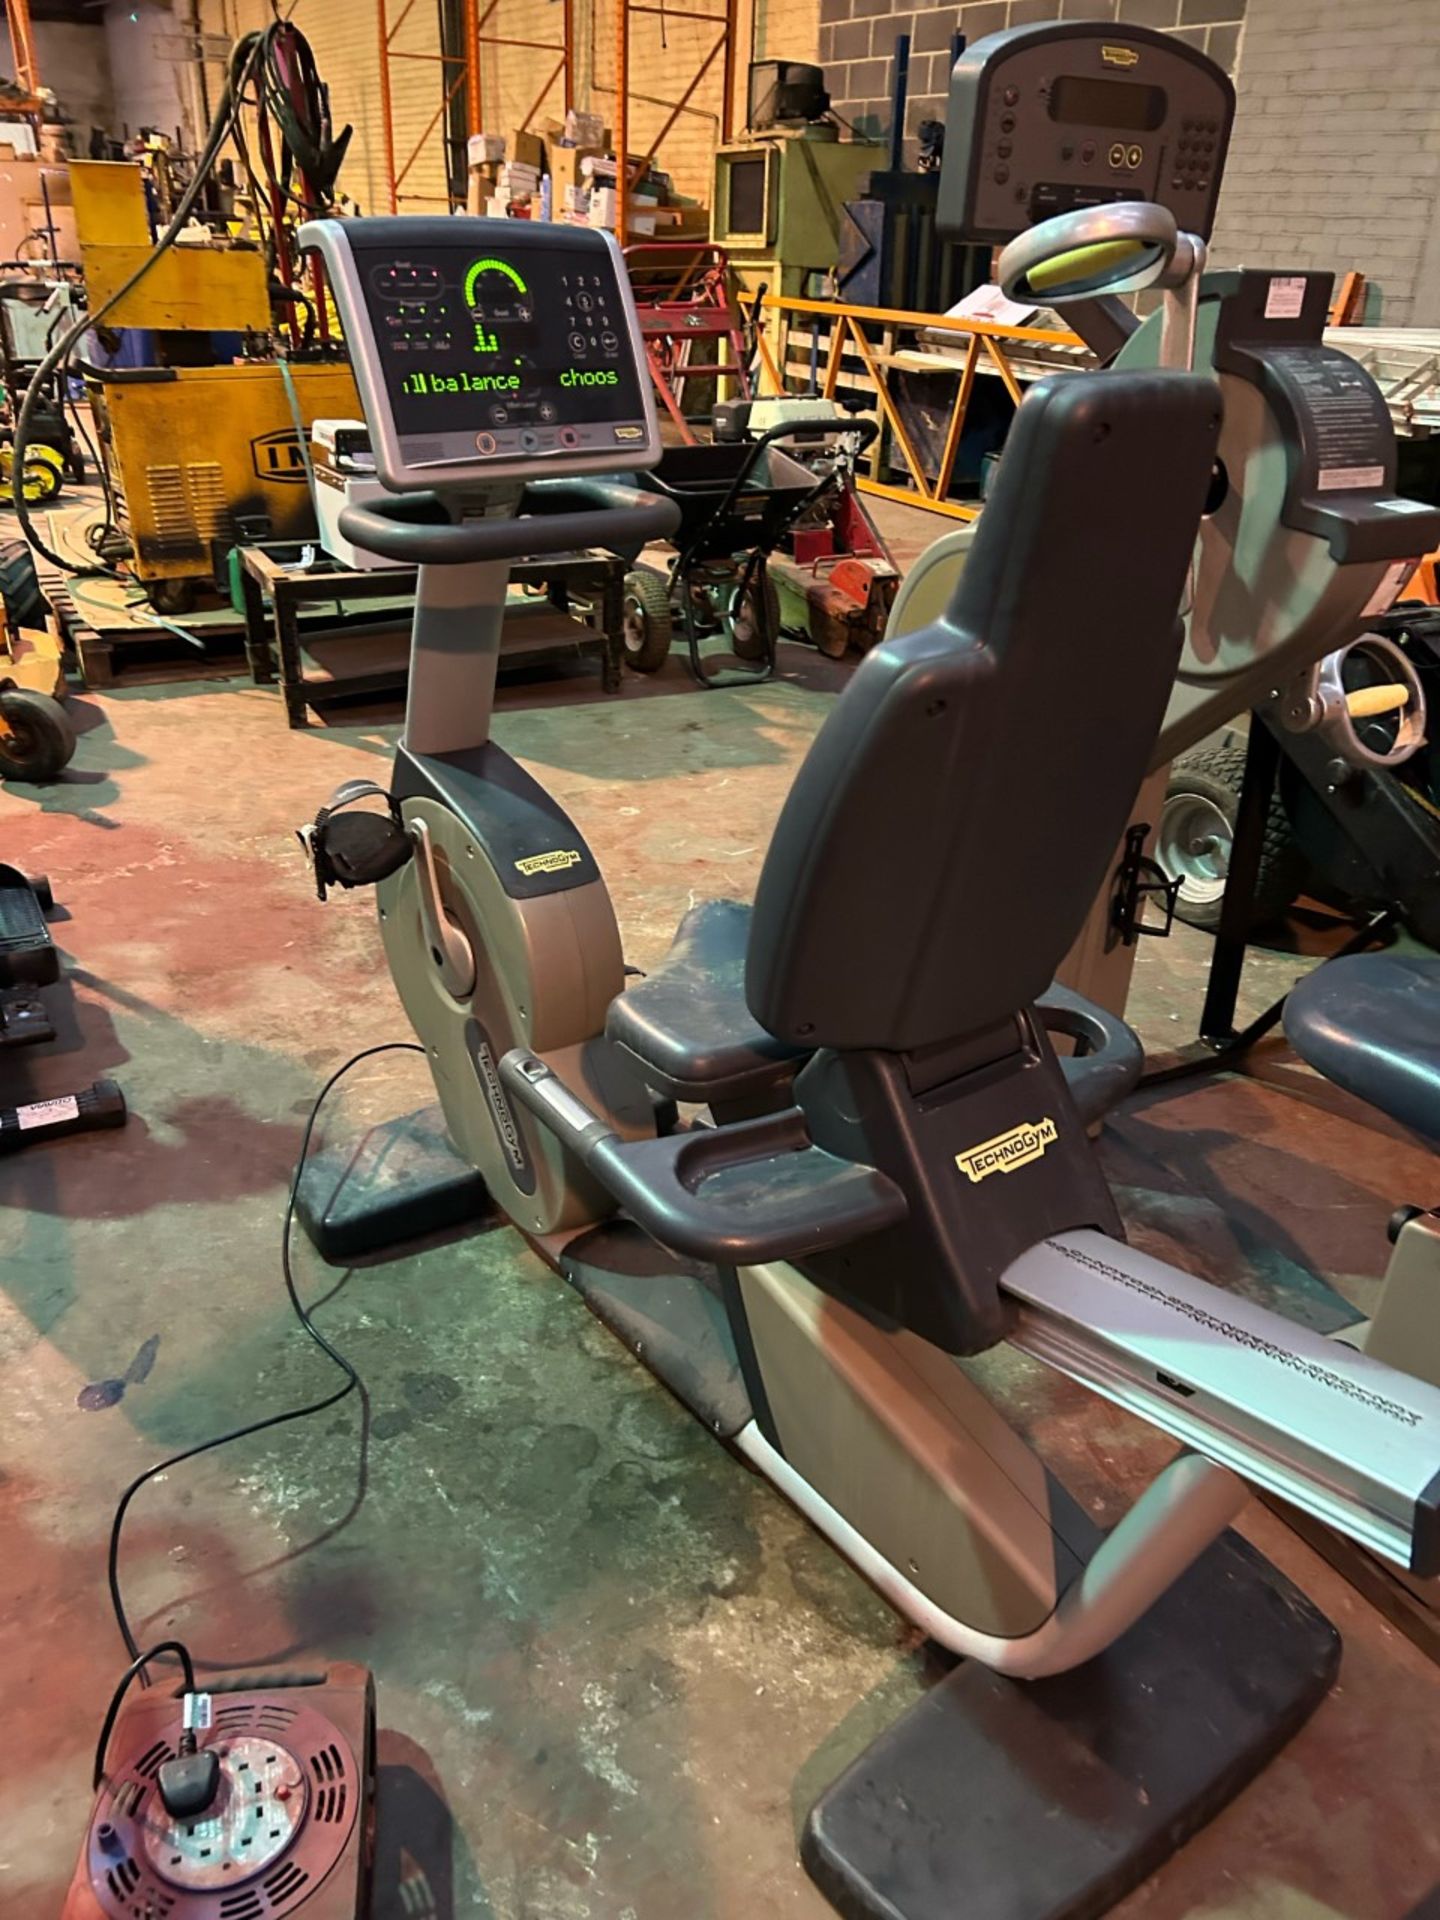 Technogym excite 700i recline recumbent exercise bike. Excellent condition, full working order - Image 2 of 4